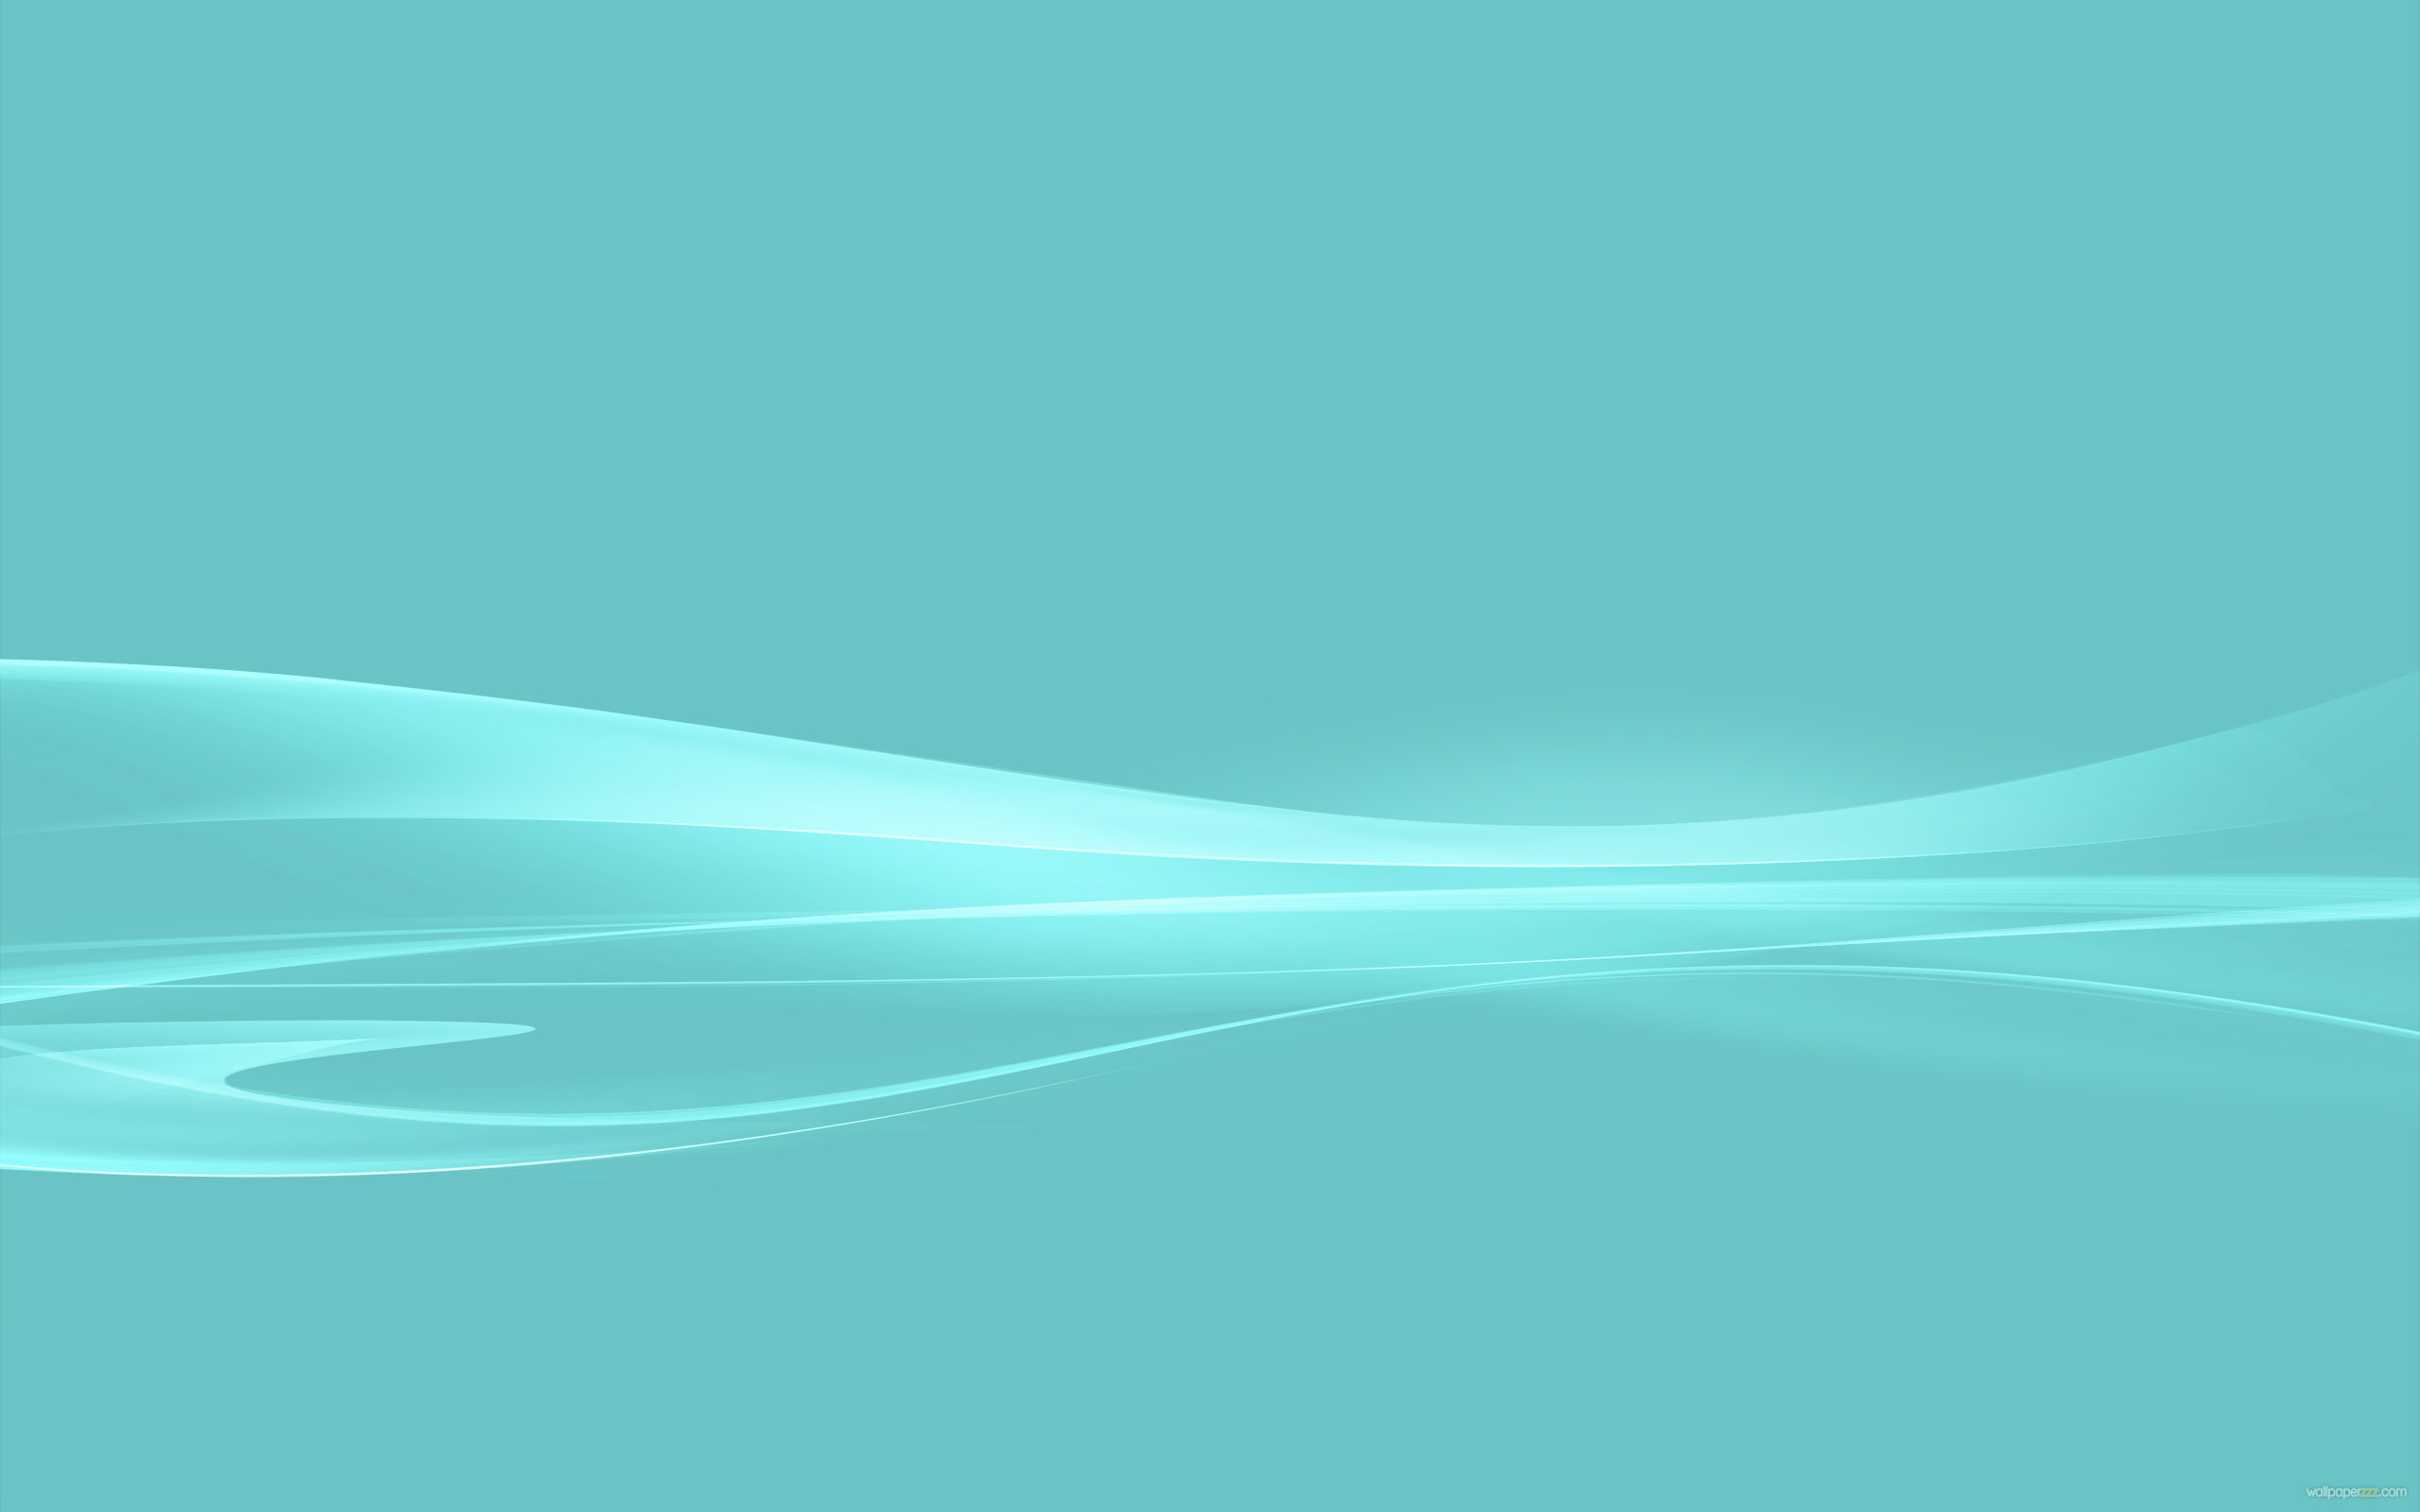  Wallpaper   related pictures blue minimalistic backgrounds cyan 23